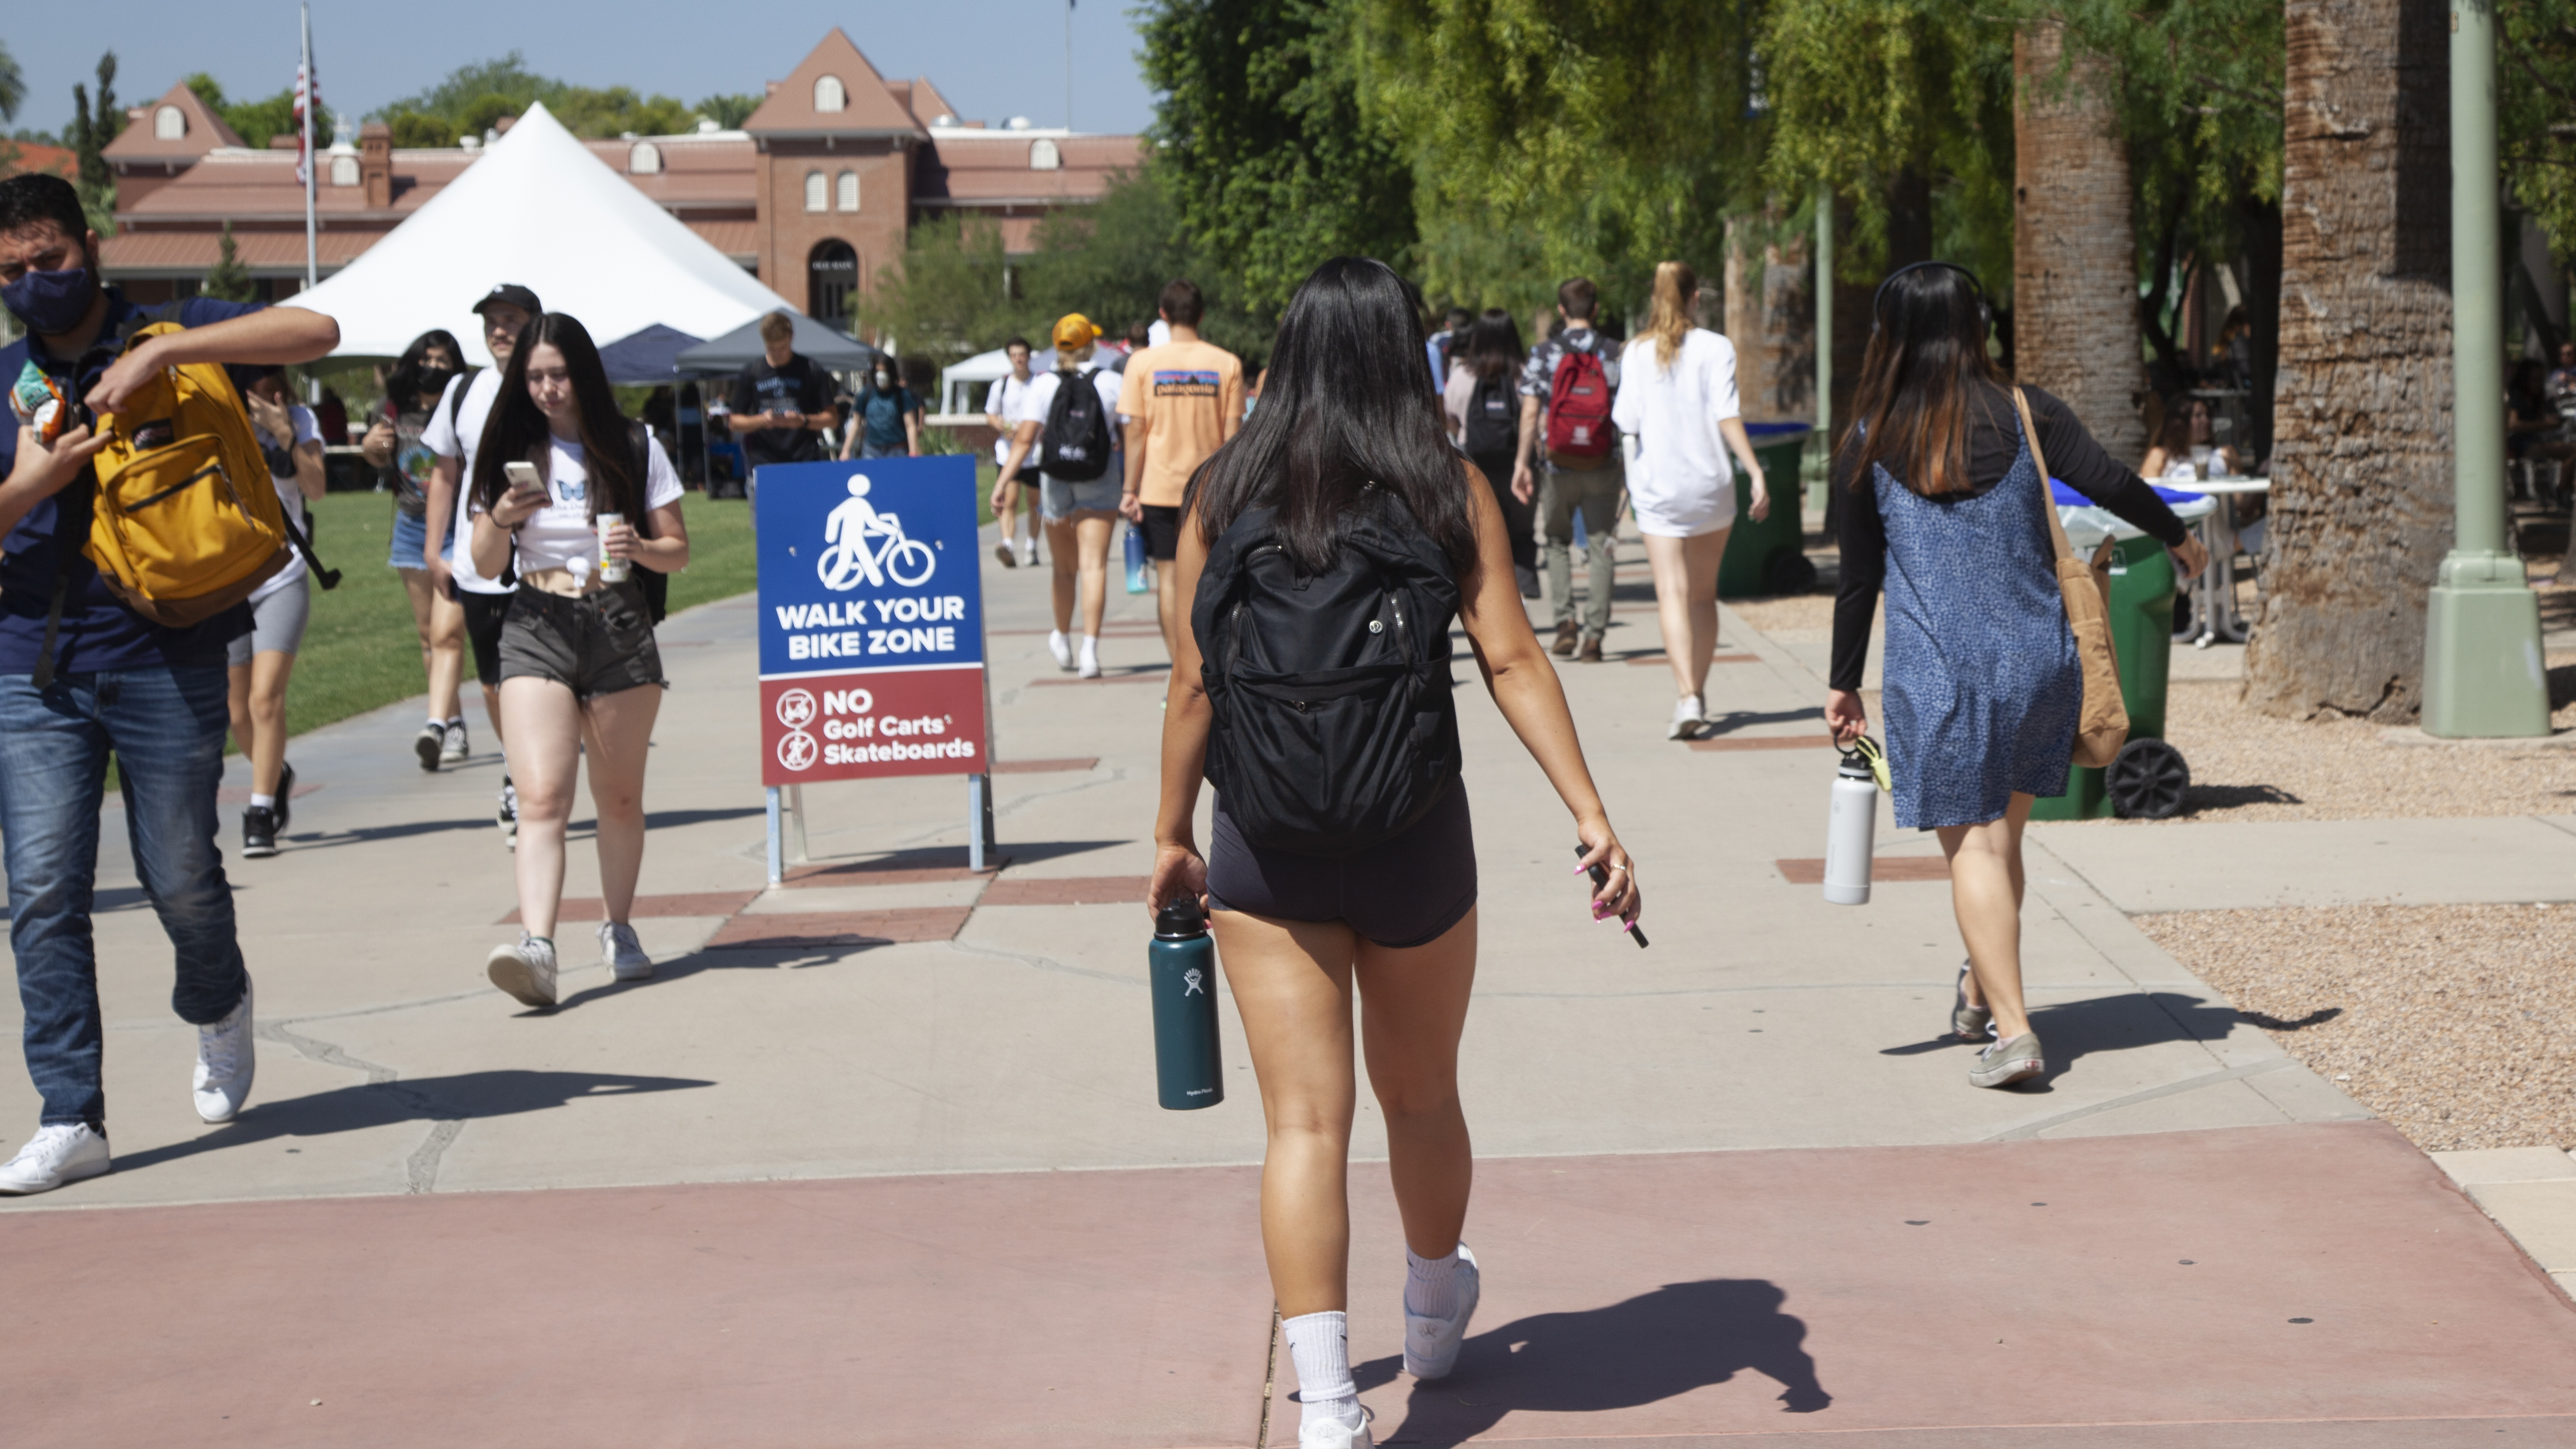 Students walking through campus on August 23, 2021 — the first day of school for the fall semester.